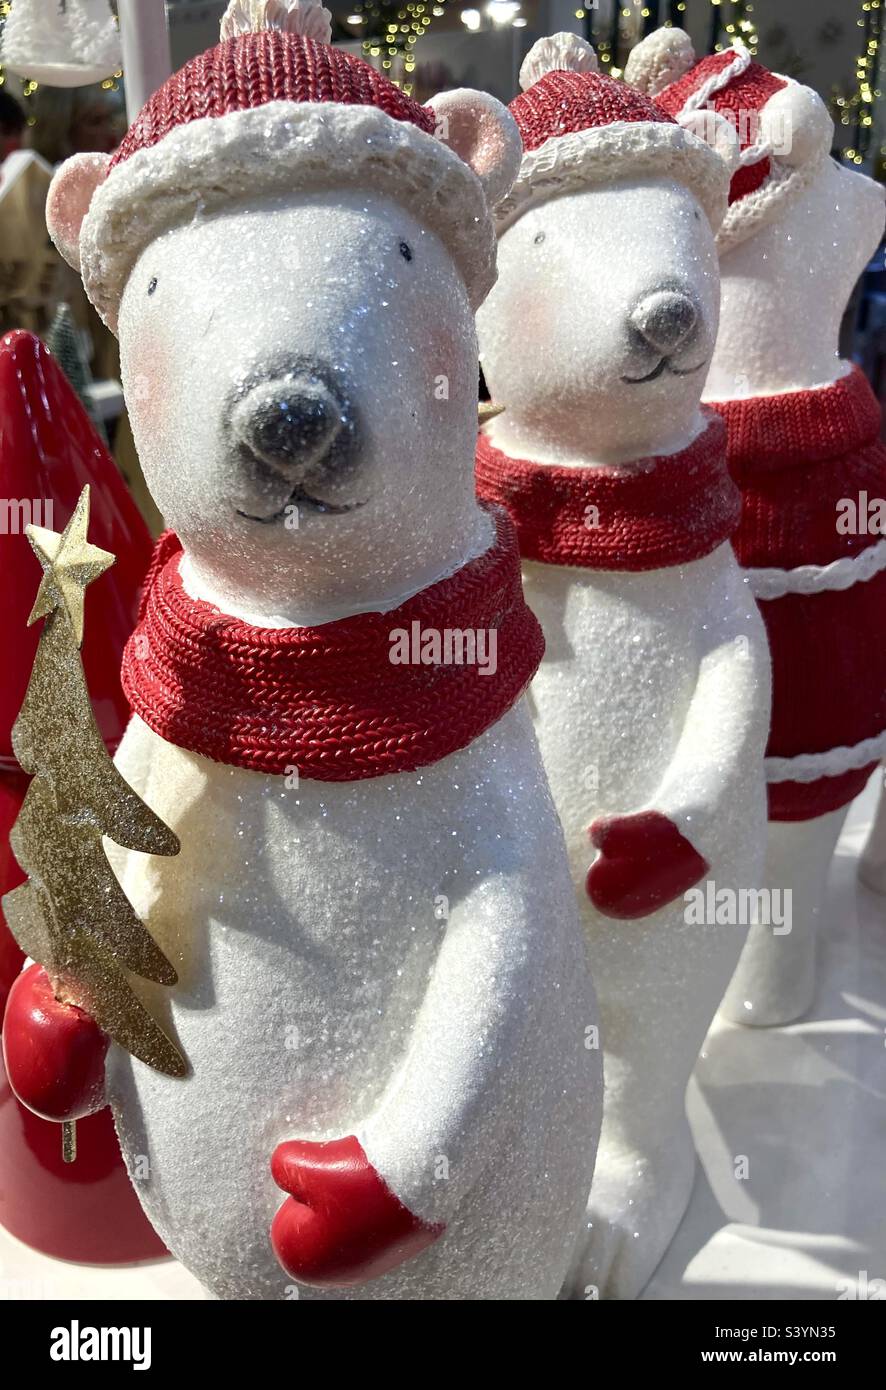 Polar bear ornaments wearing hats and scarves for Christmas Stock Photo